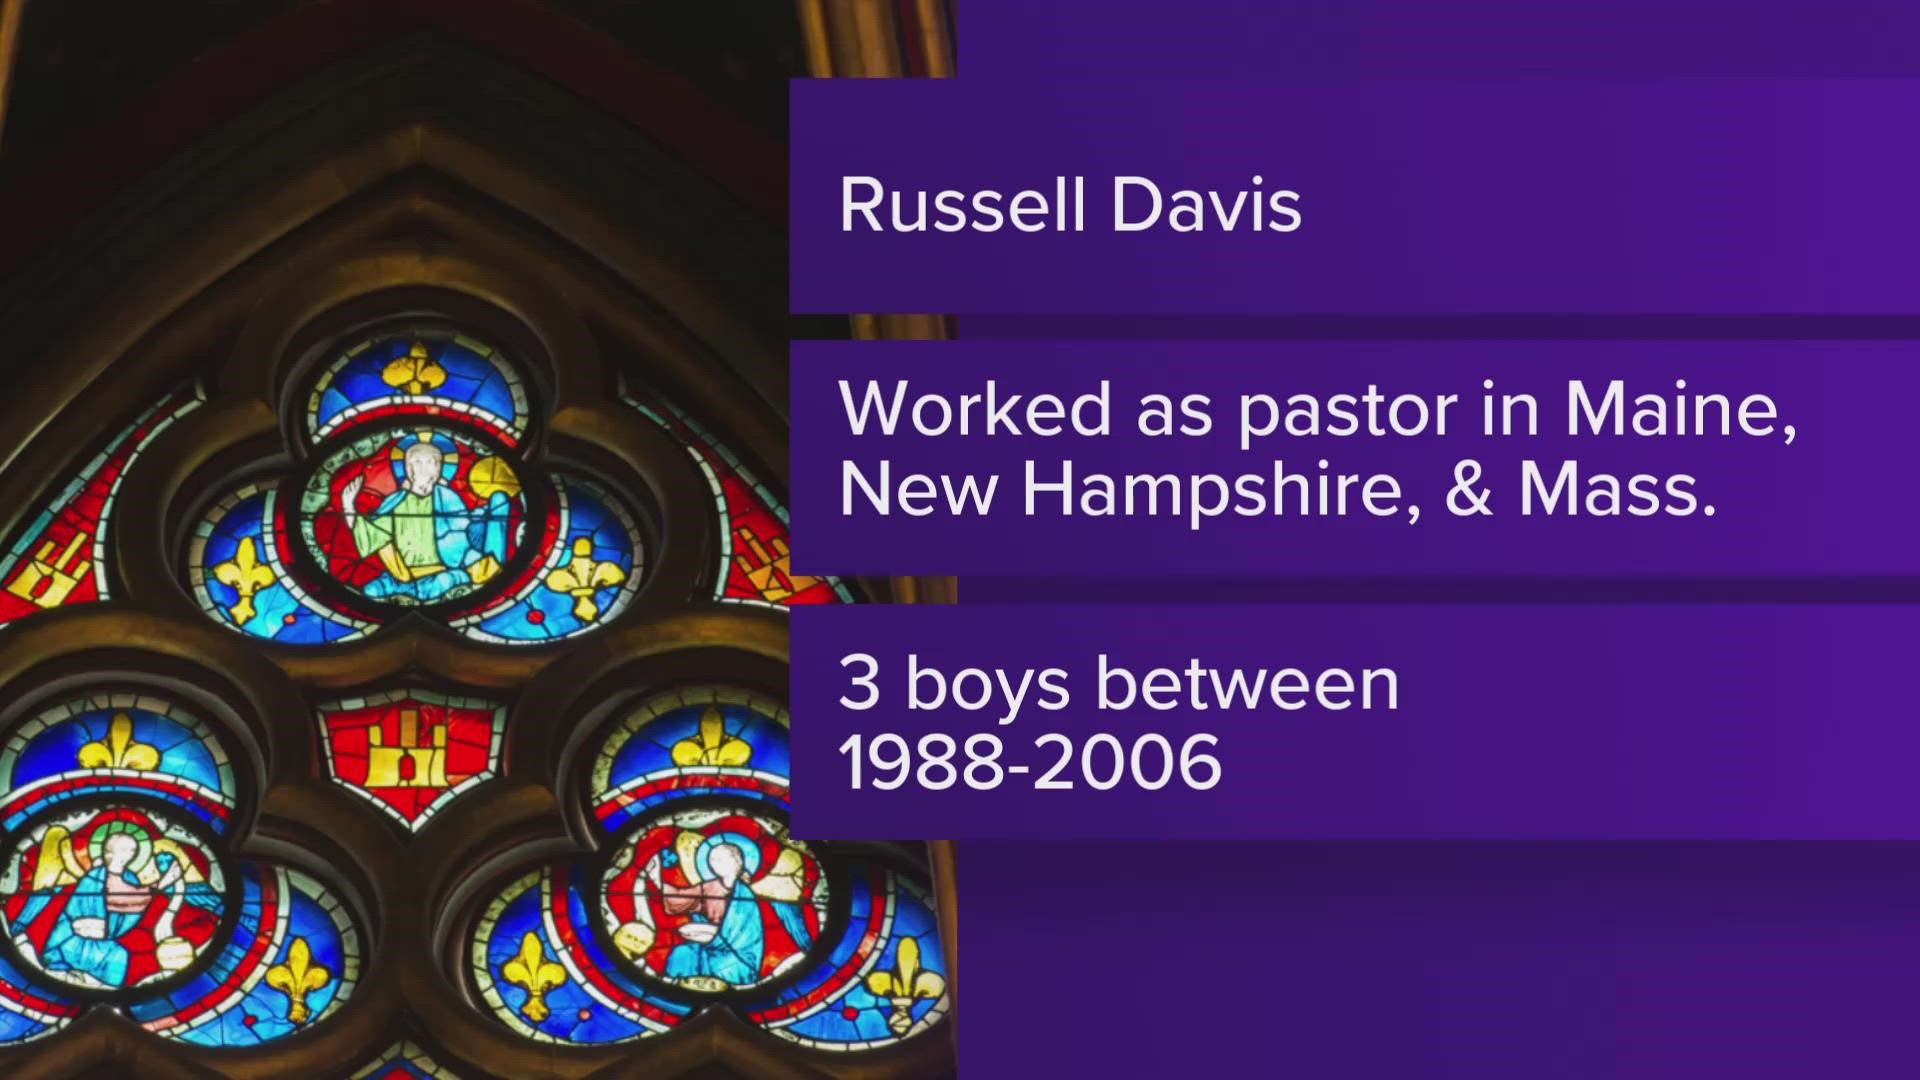 He served in churches in Massachusetts, New Hampshire, and Maine, according to the United Methodist Church New England Conference.